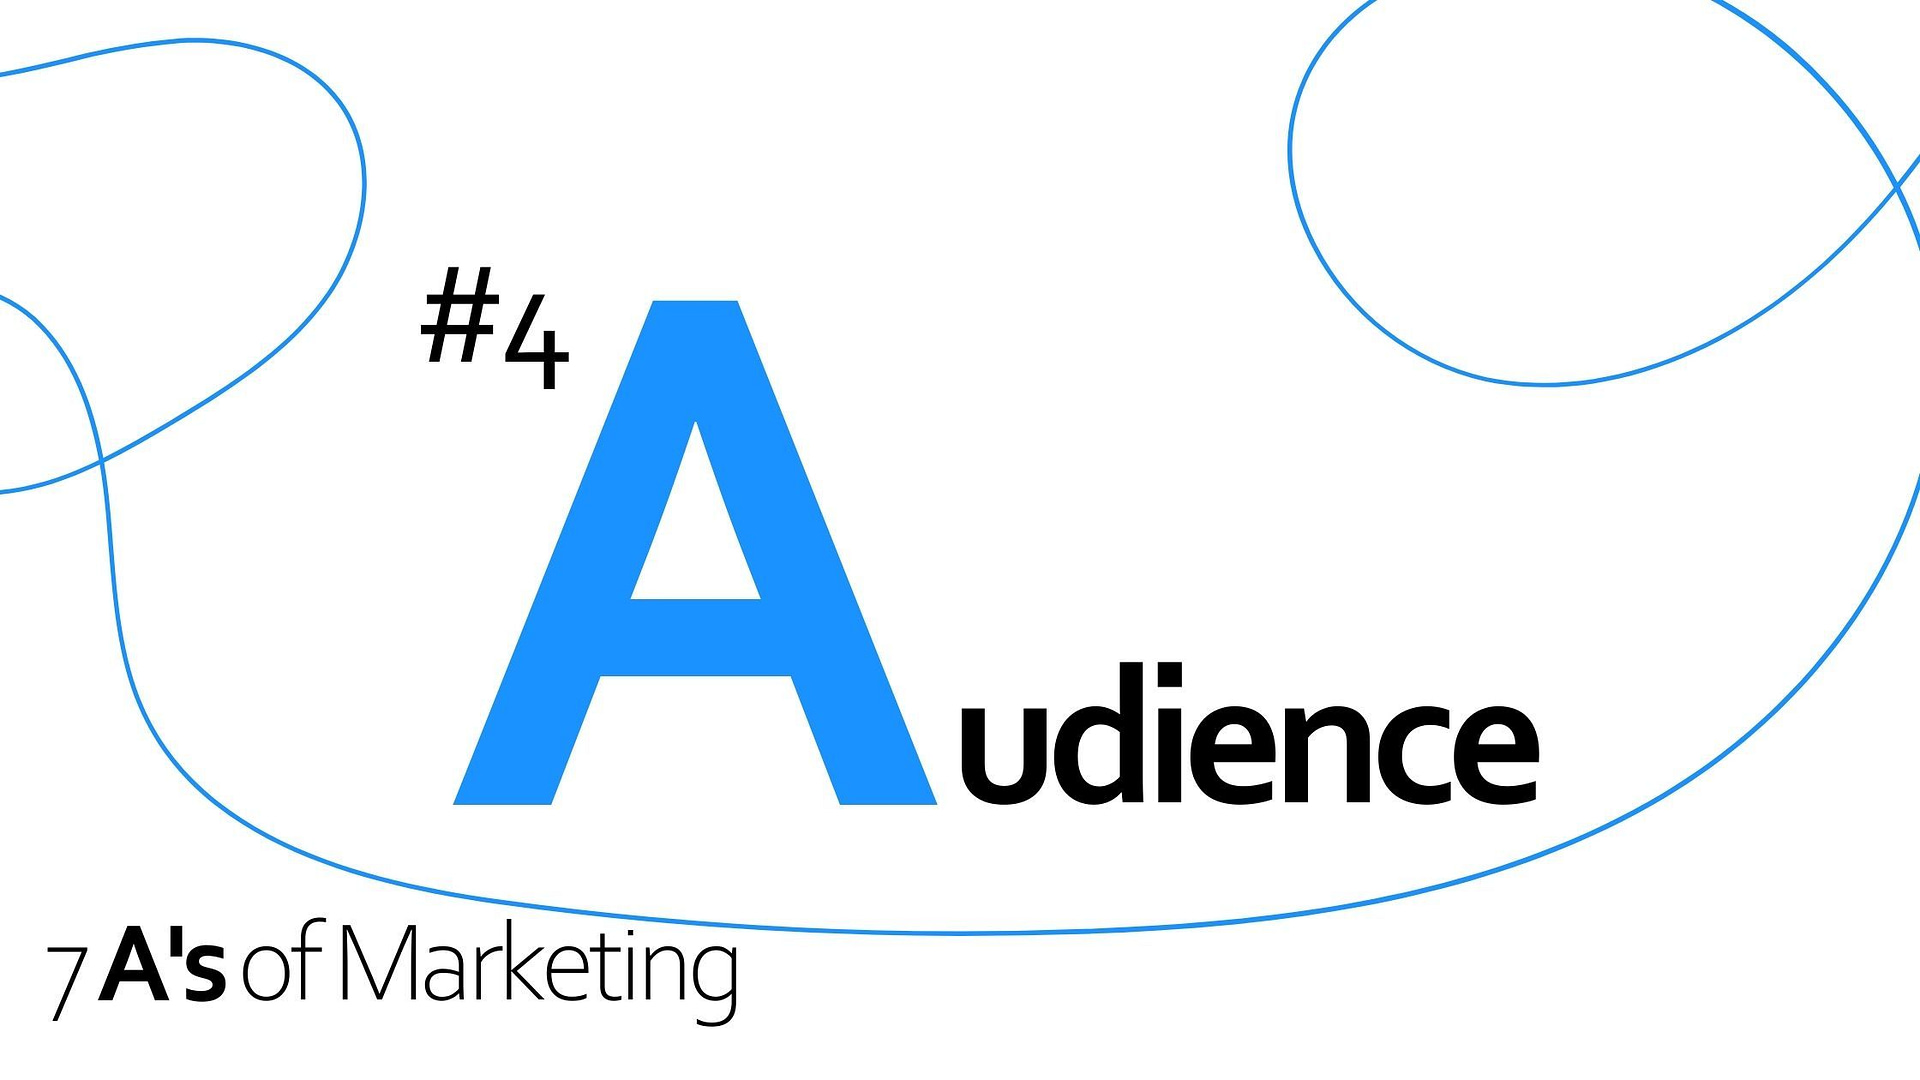 7 A's of Marketing - #4 Audience